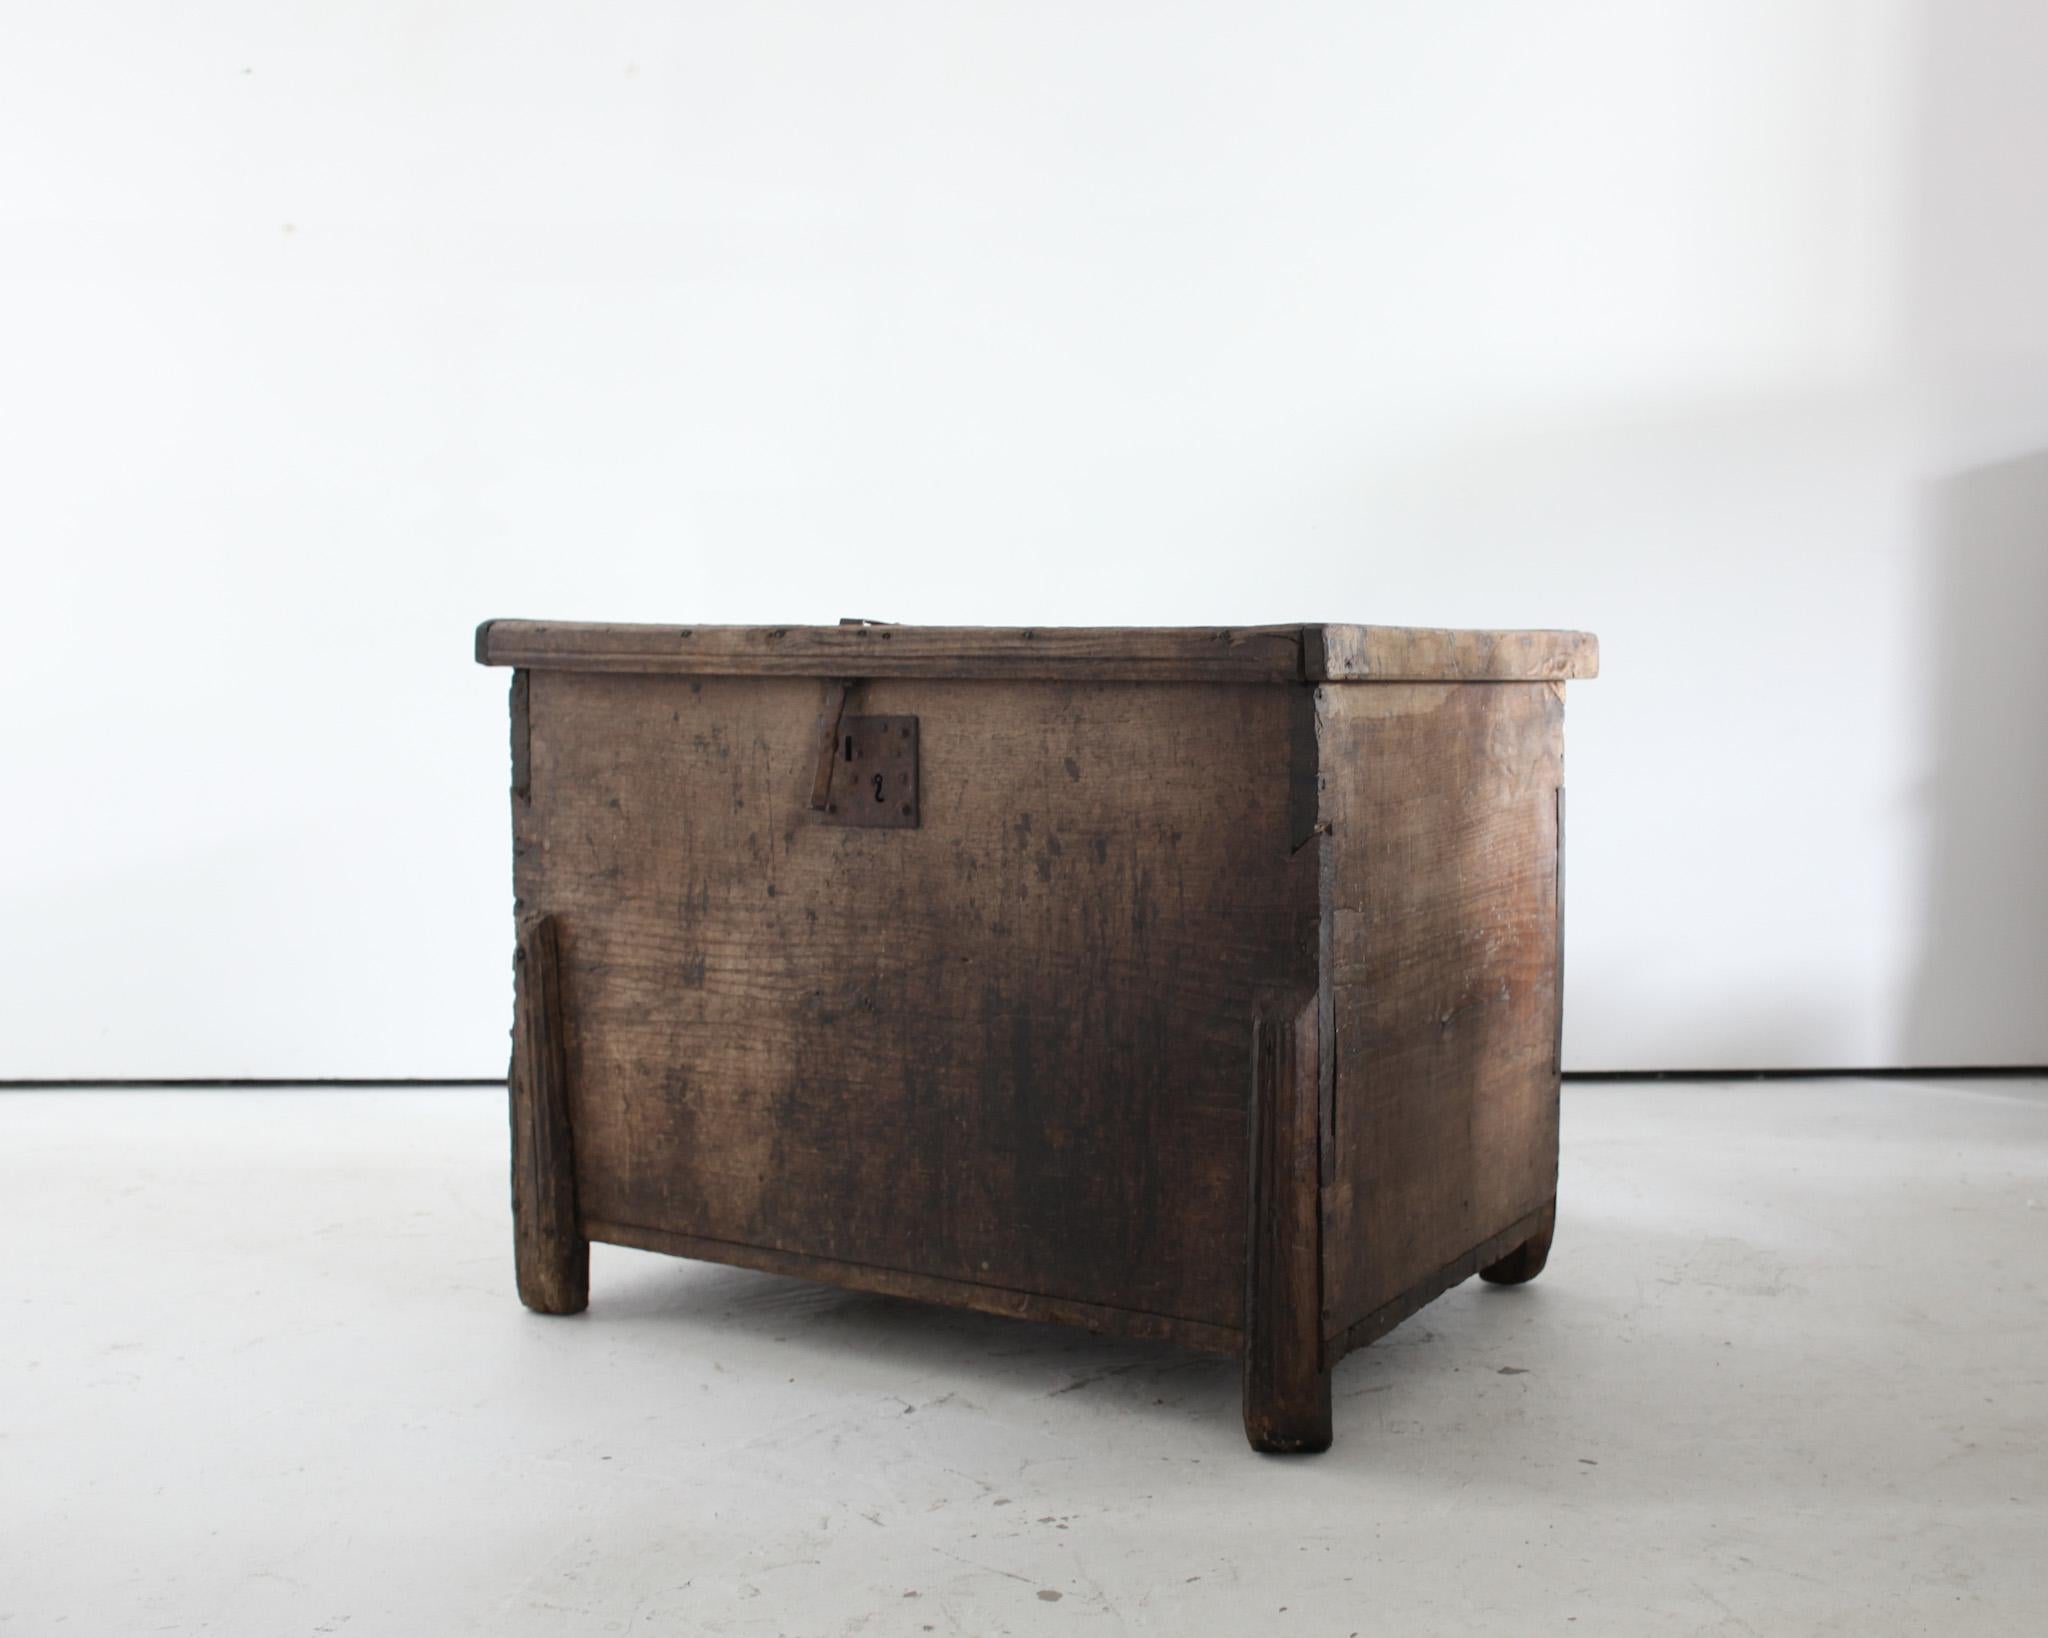 A large northern Portuguese hewn chestnut coffer from the late 18th C.

Beautiful patination developed through hundreds of years of use with many age old repairs.

Perfect as a console and/or storage.